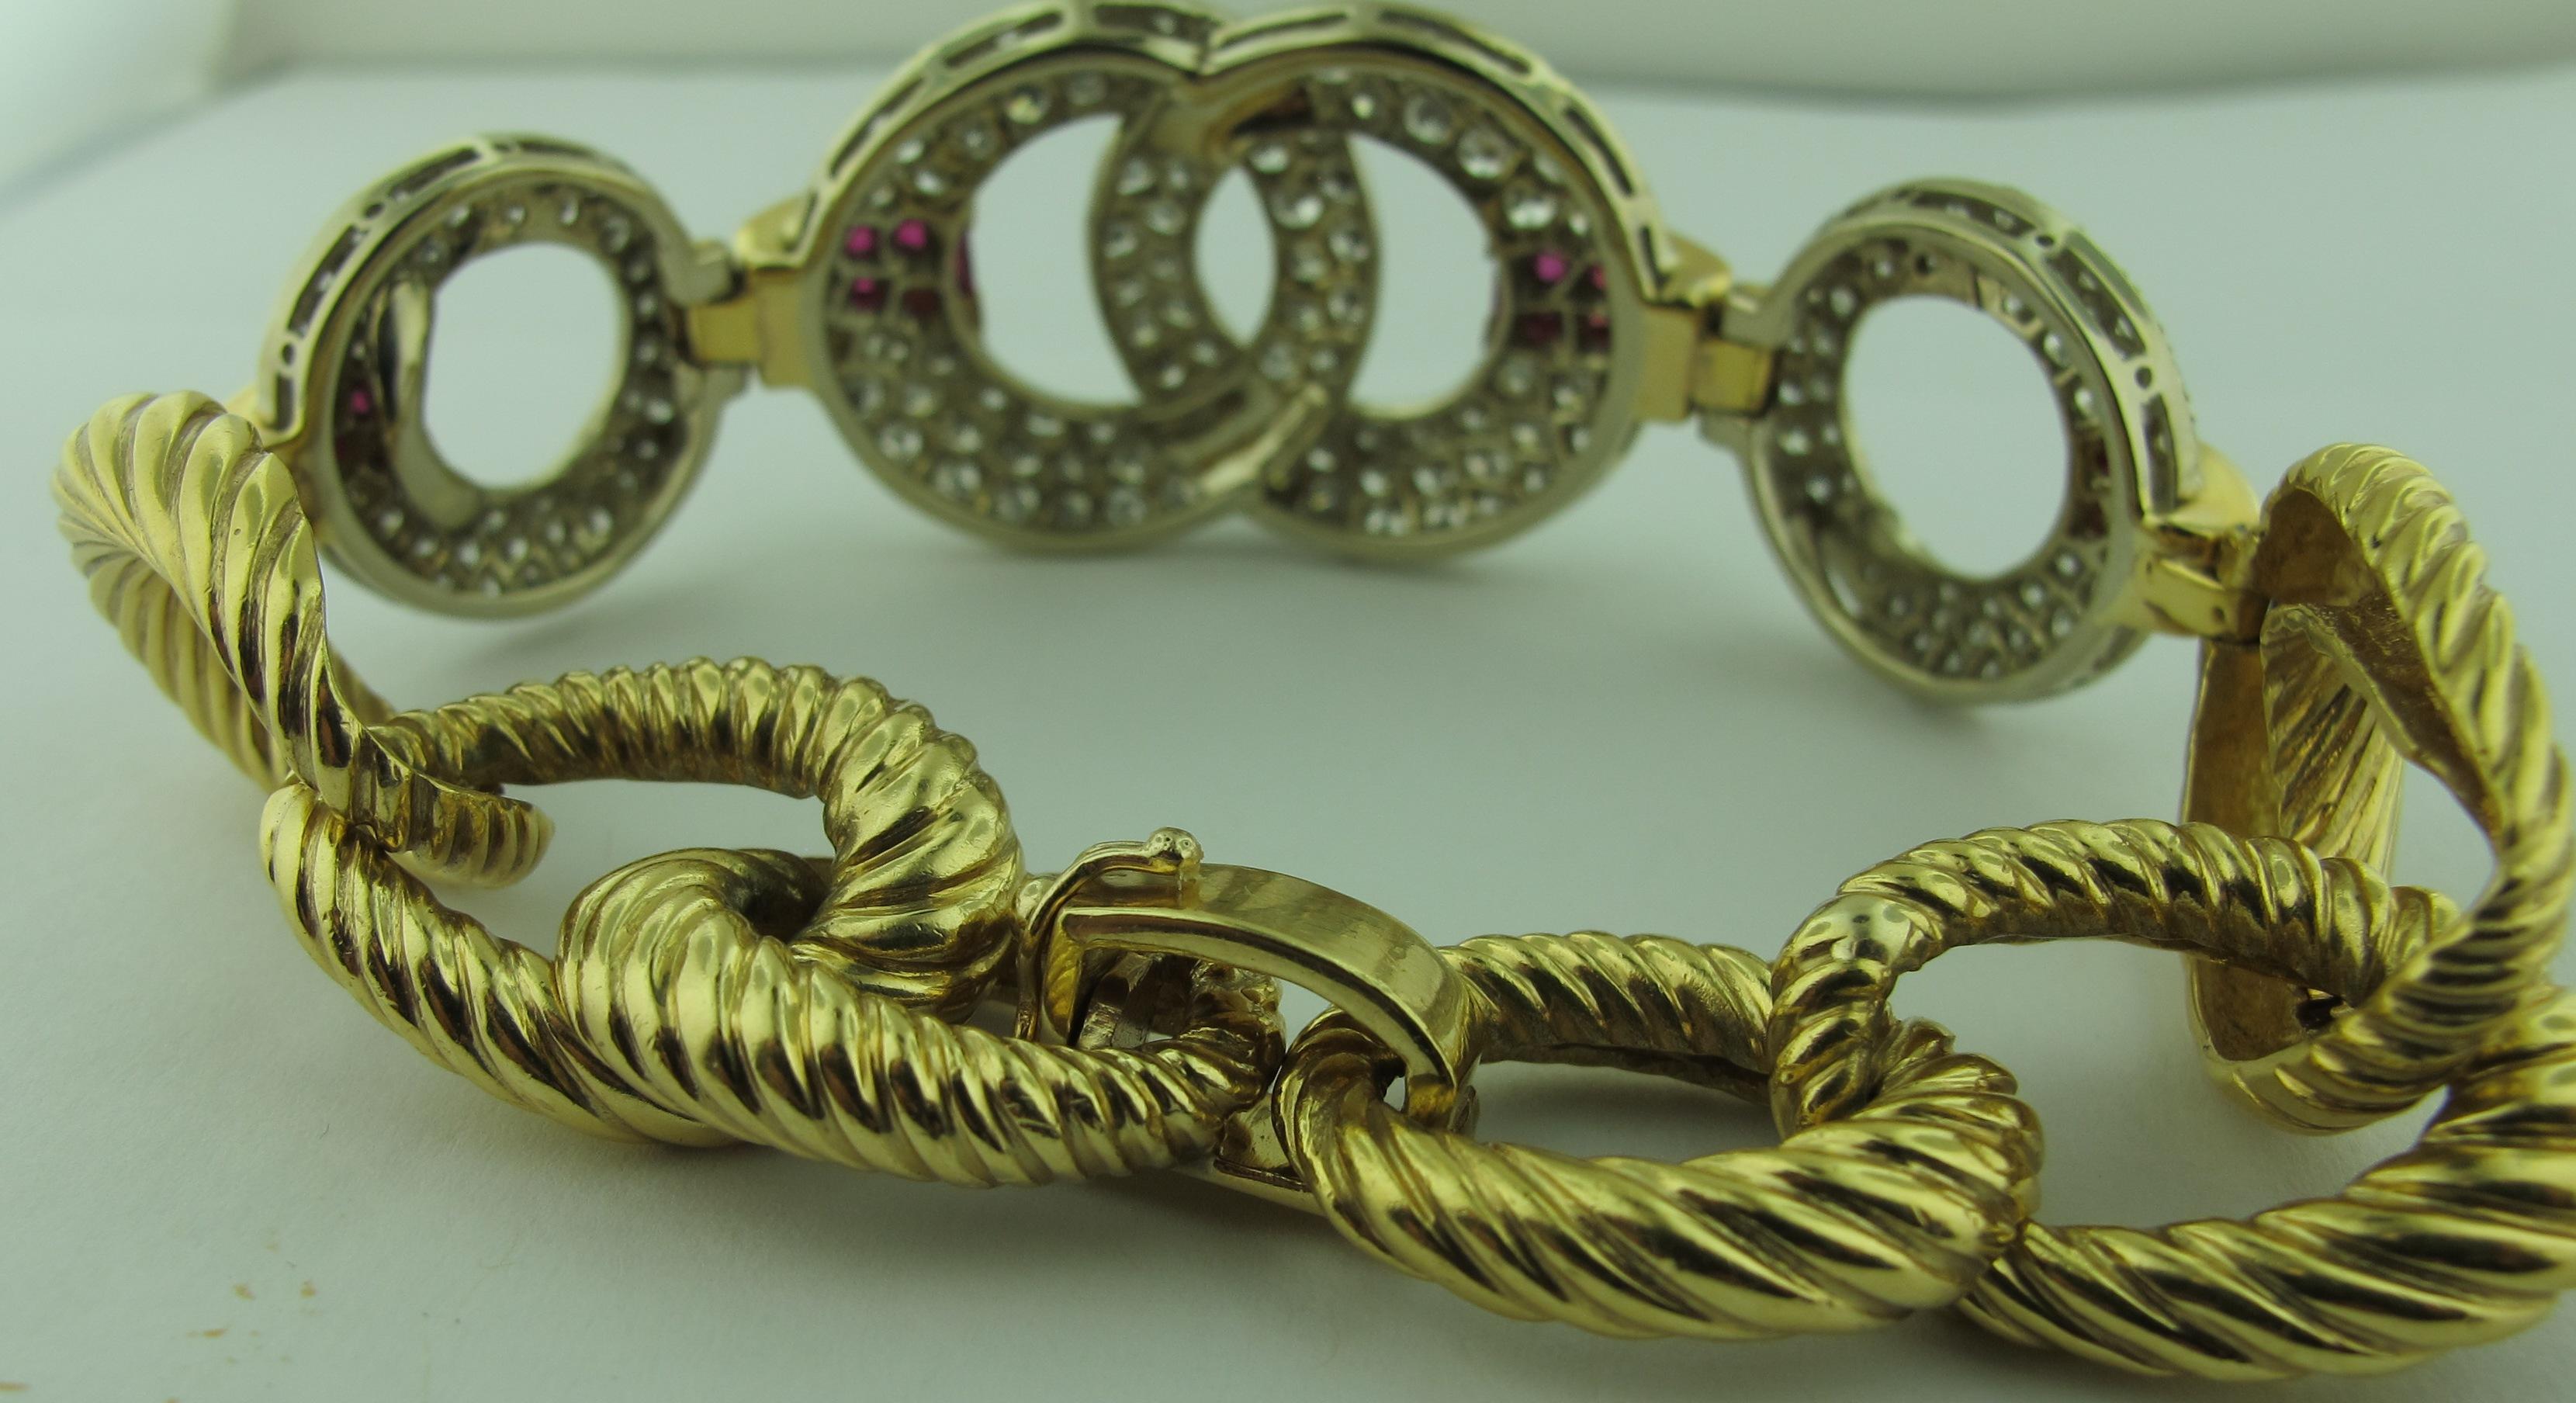 Diamond and Ruby Bracelet set in 14 karat white and yellow gold In Excellent Condition For Sale In Palm Desert, CA